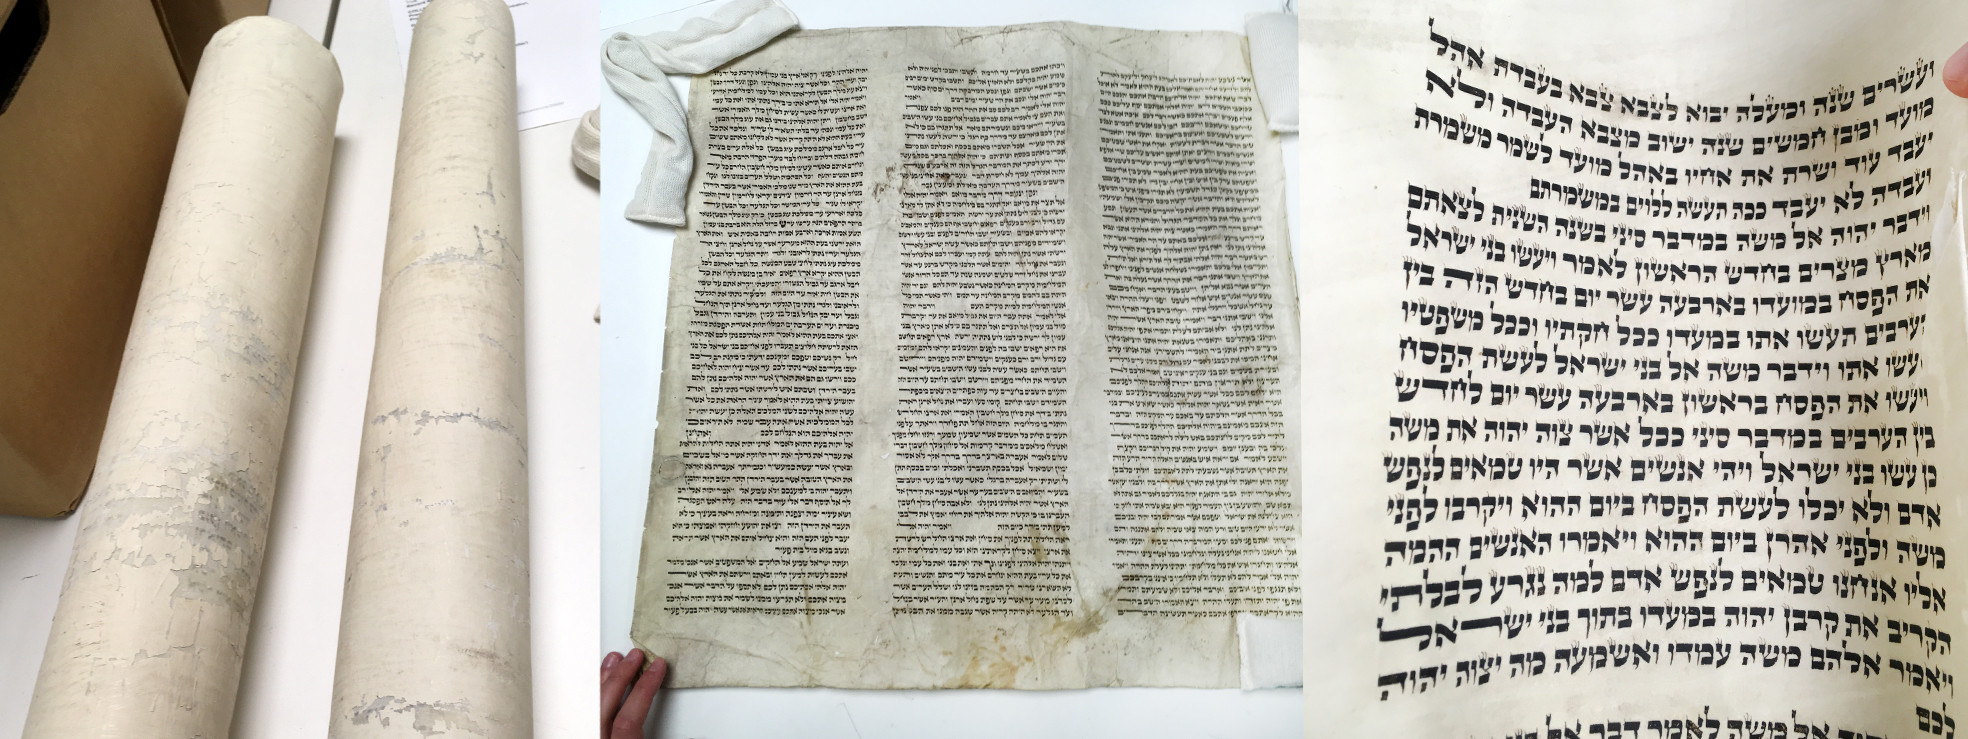 Composite photograph of the sefer Torah fragments.